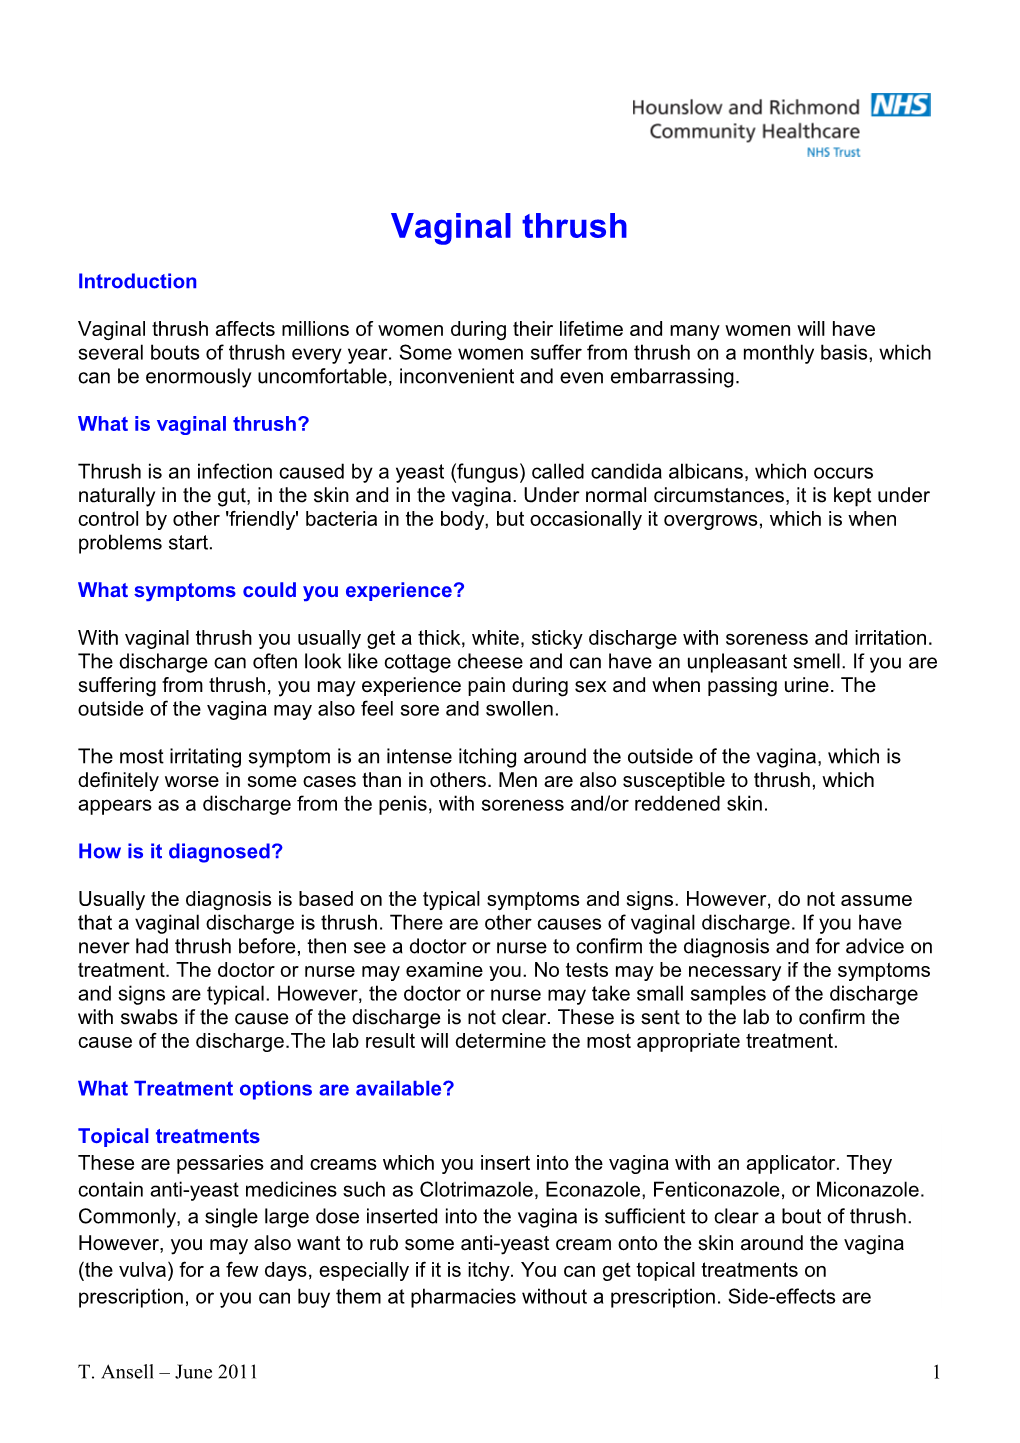 What Is Vaginal Thrush?